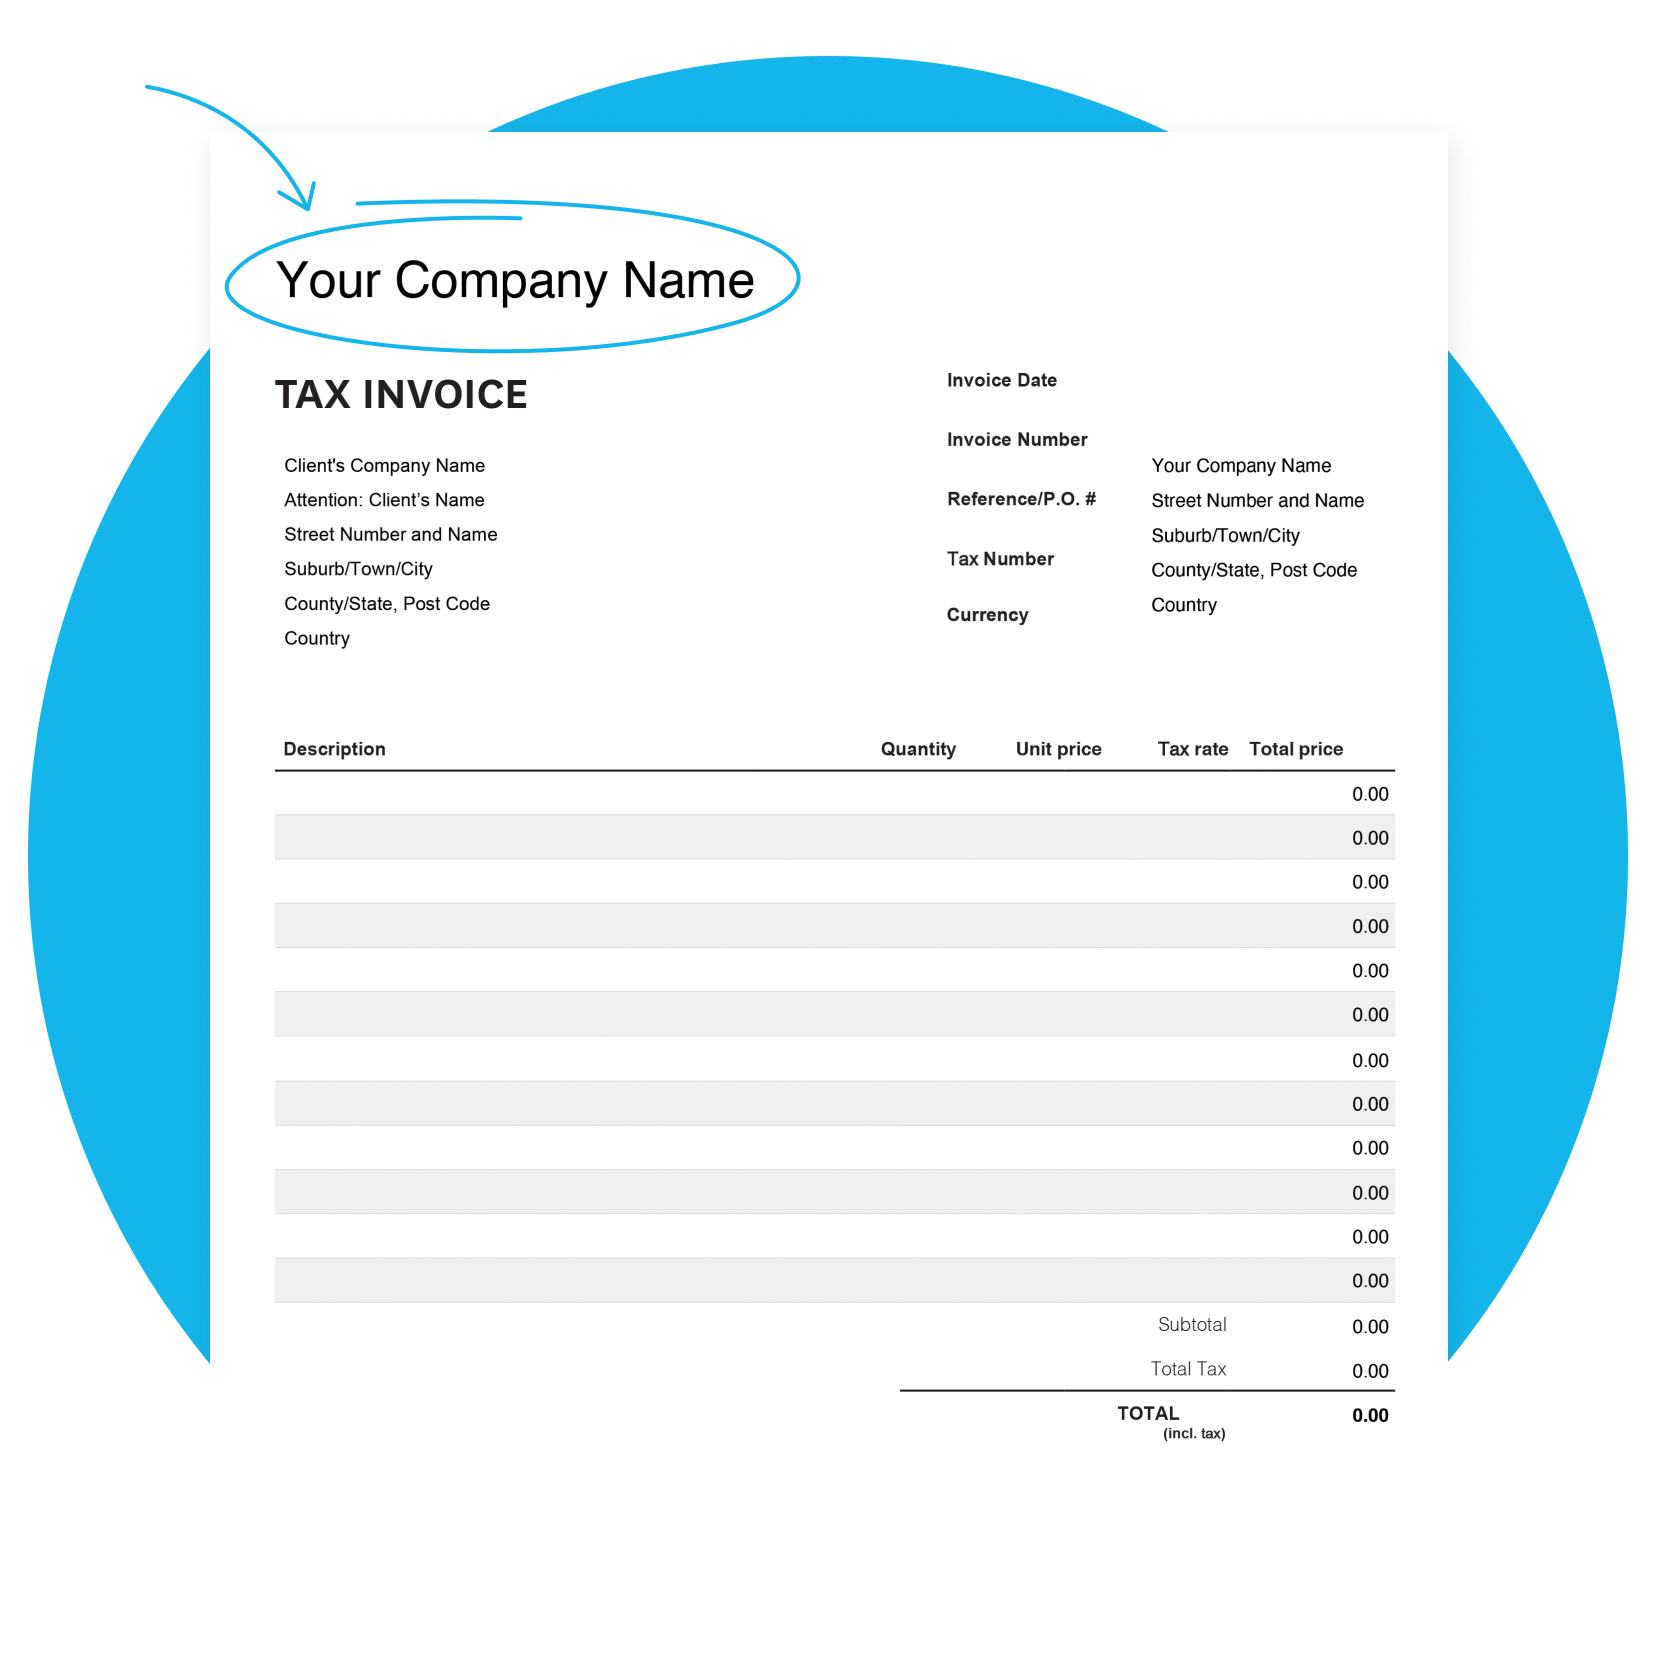 Invoice template with blank fields for users to fill out. 